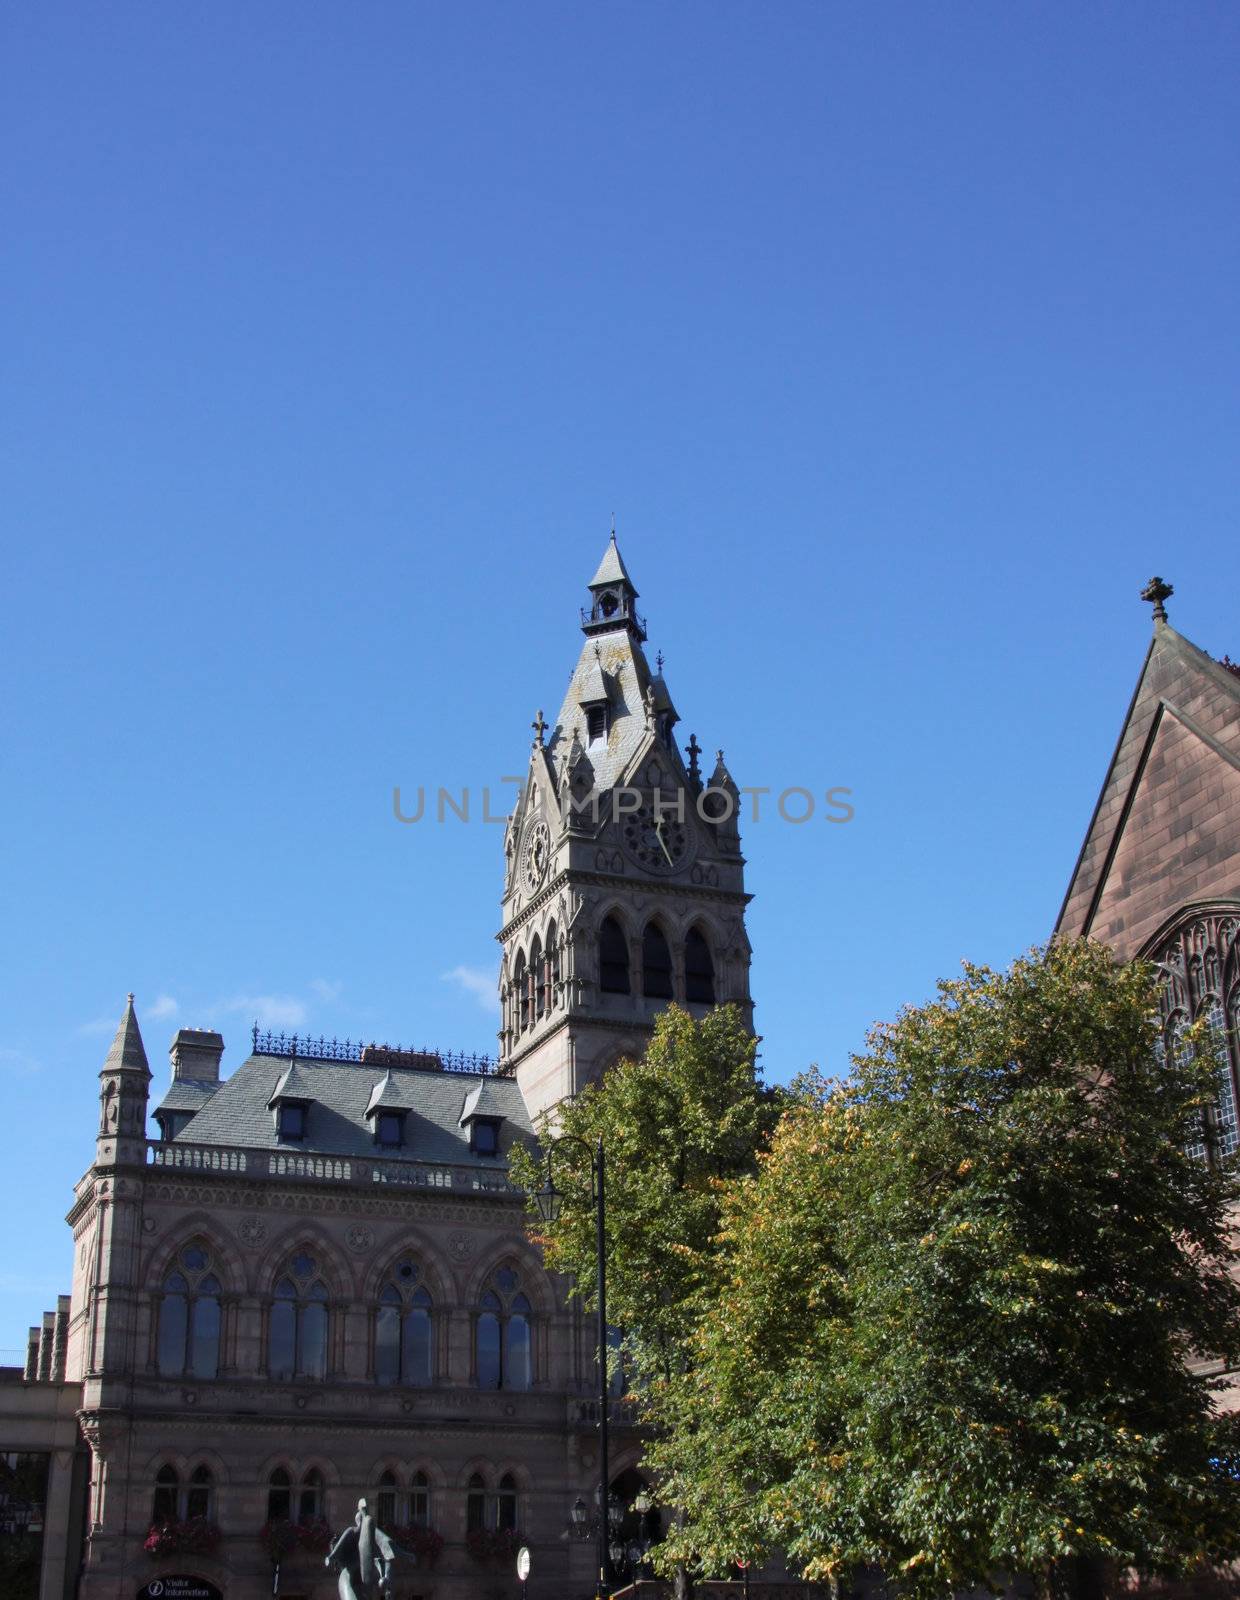 The Town Hall Chester Cheshire England UK